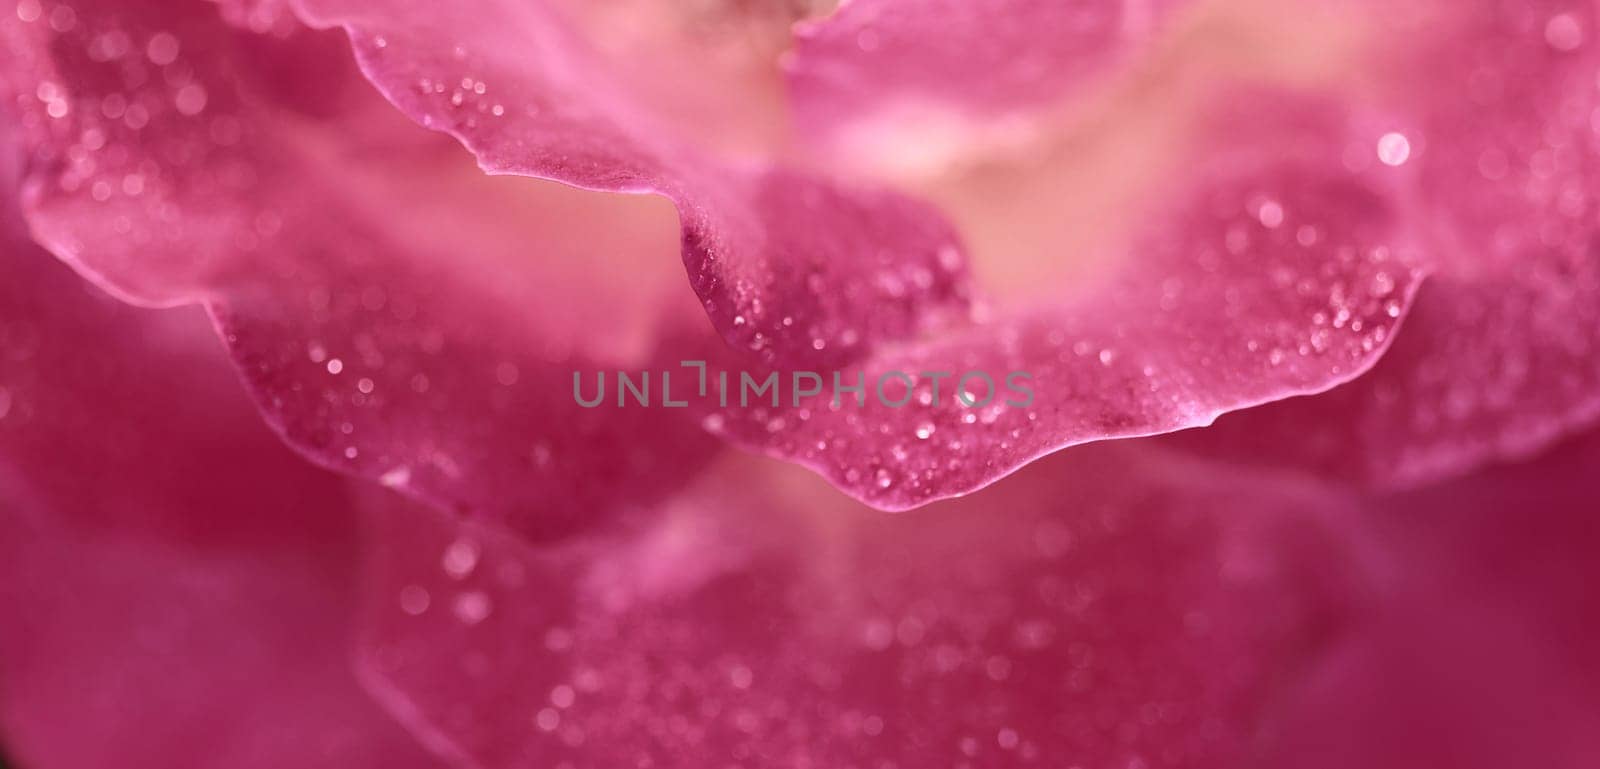 Pink yellow rose flower petals with dew drops. Macro flowers background for holiday design by Olayola